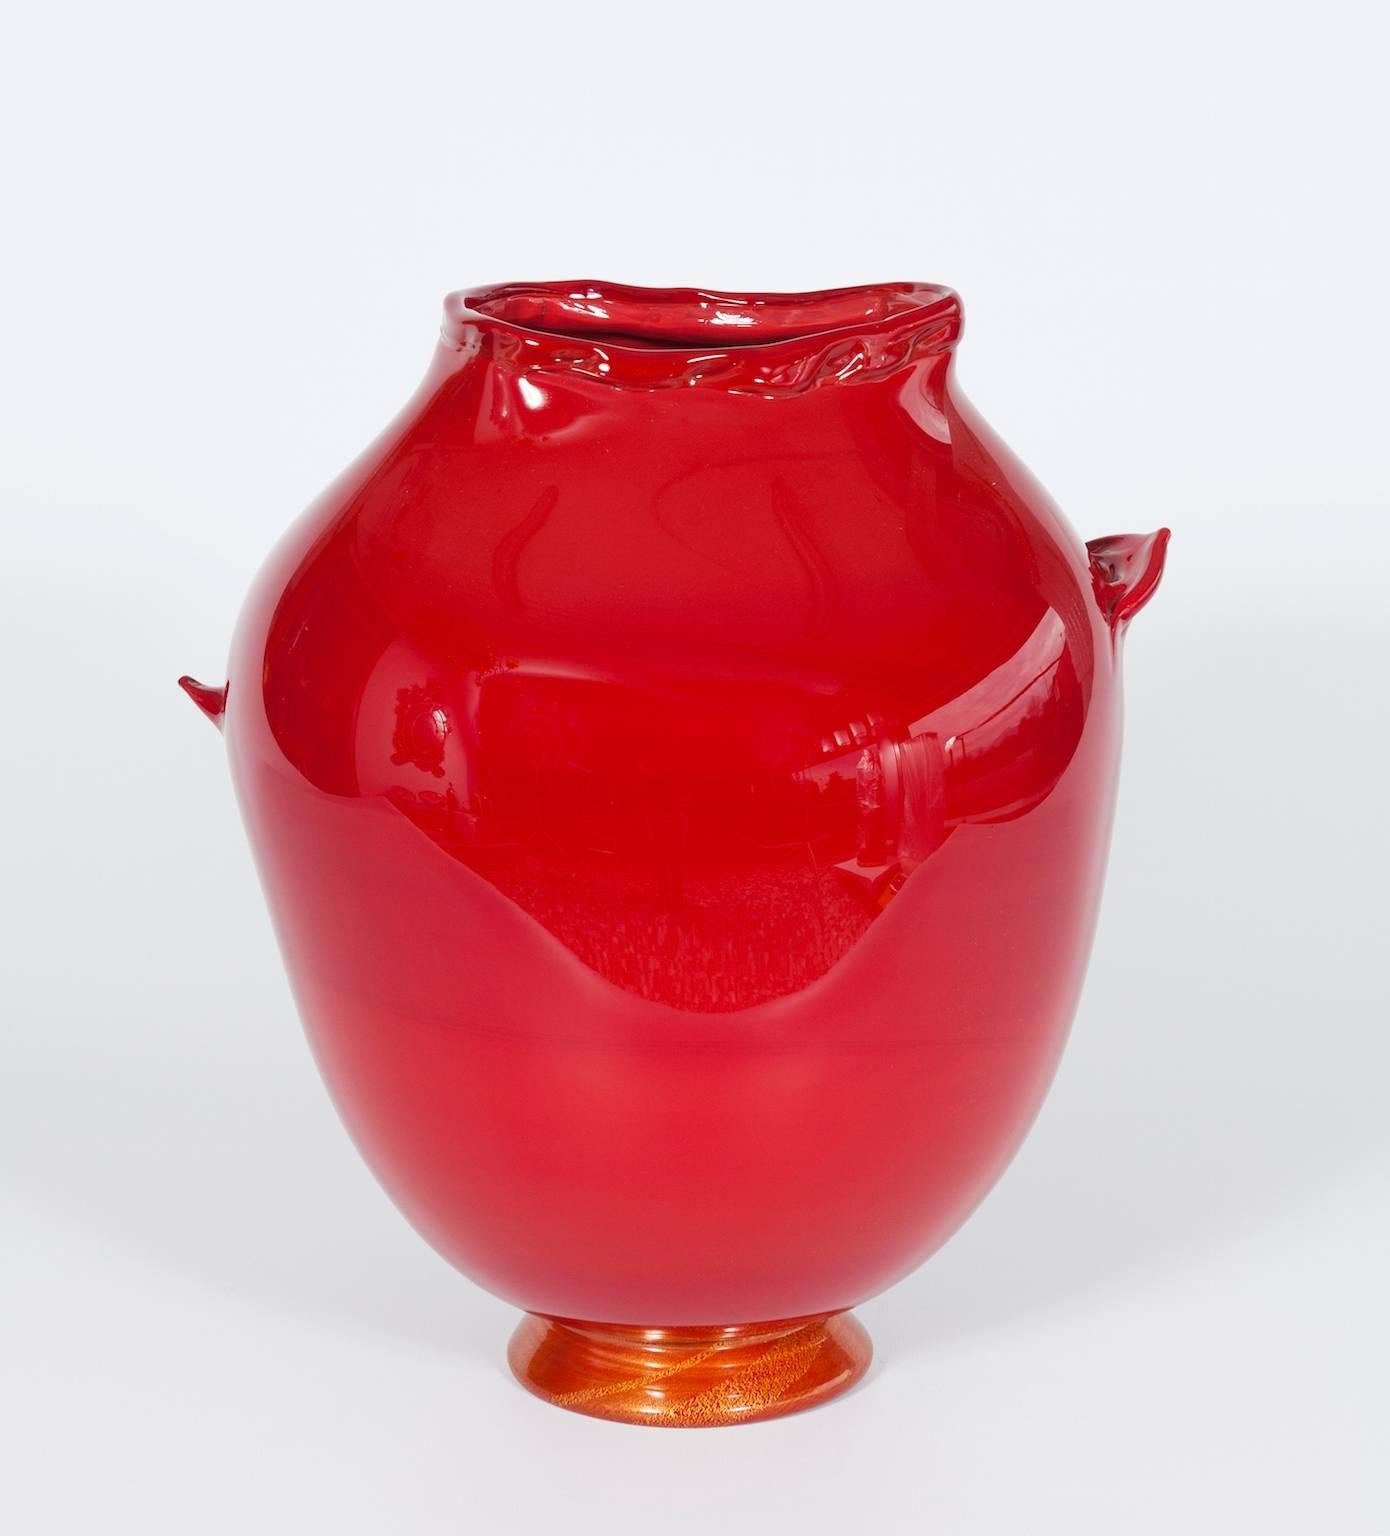 Italian Venetian, Handcrafted Vase, Blown Murano Glass, Red & Gold finish, 1980s
This is a unique and gorgeous vase, having a special irregular shape, entirely handcrafted in blown Murano glass. The most special detail, that makes this fantastic